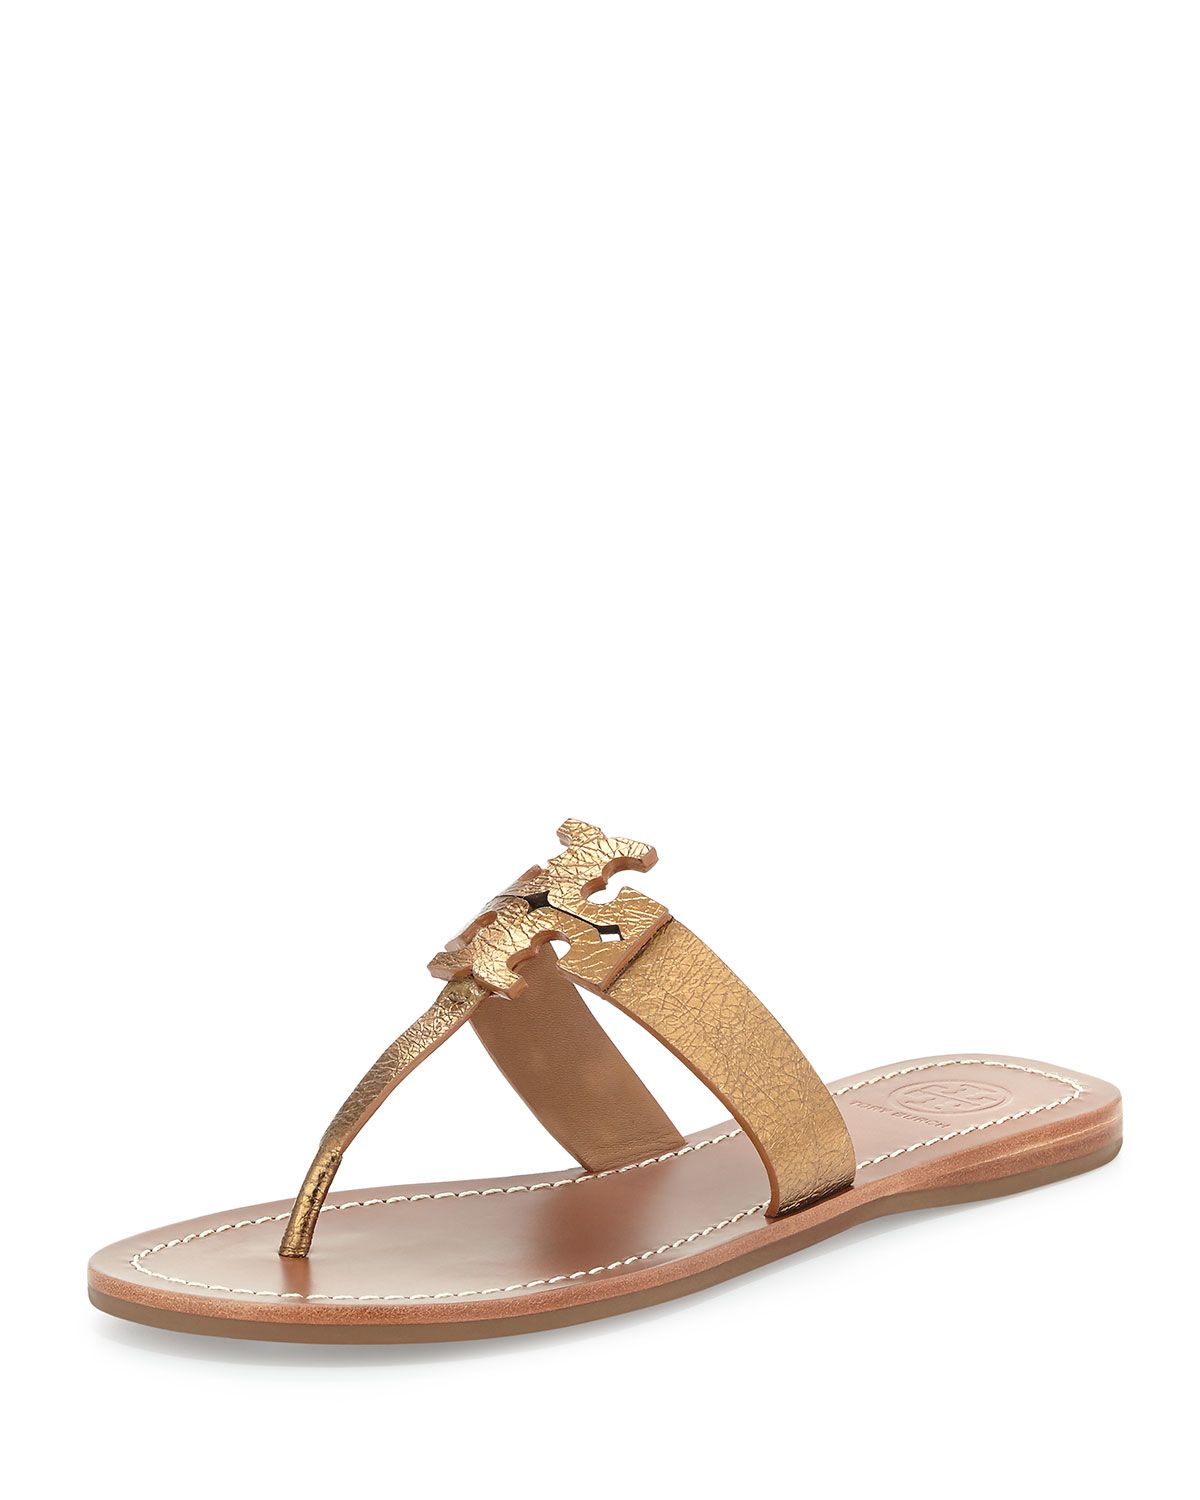 Tory burch Moore Metallic Leather Sandal in Gold (bronze) | Lyst